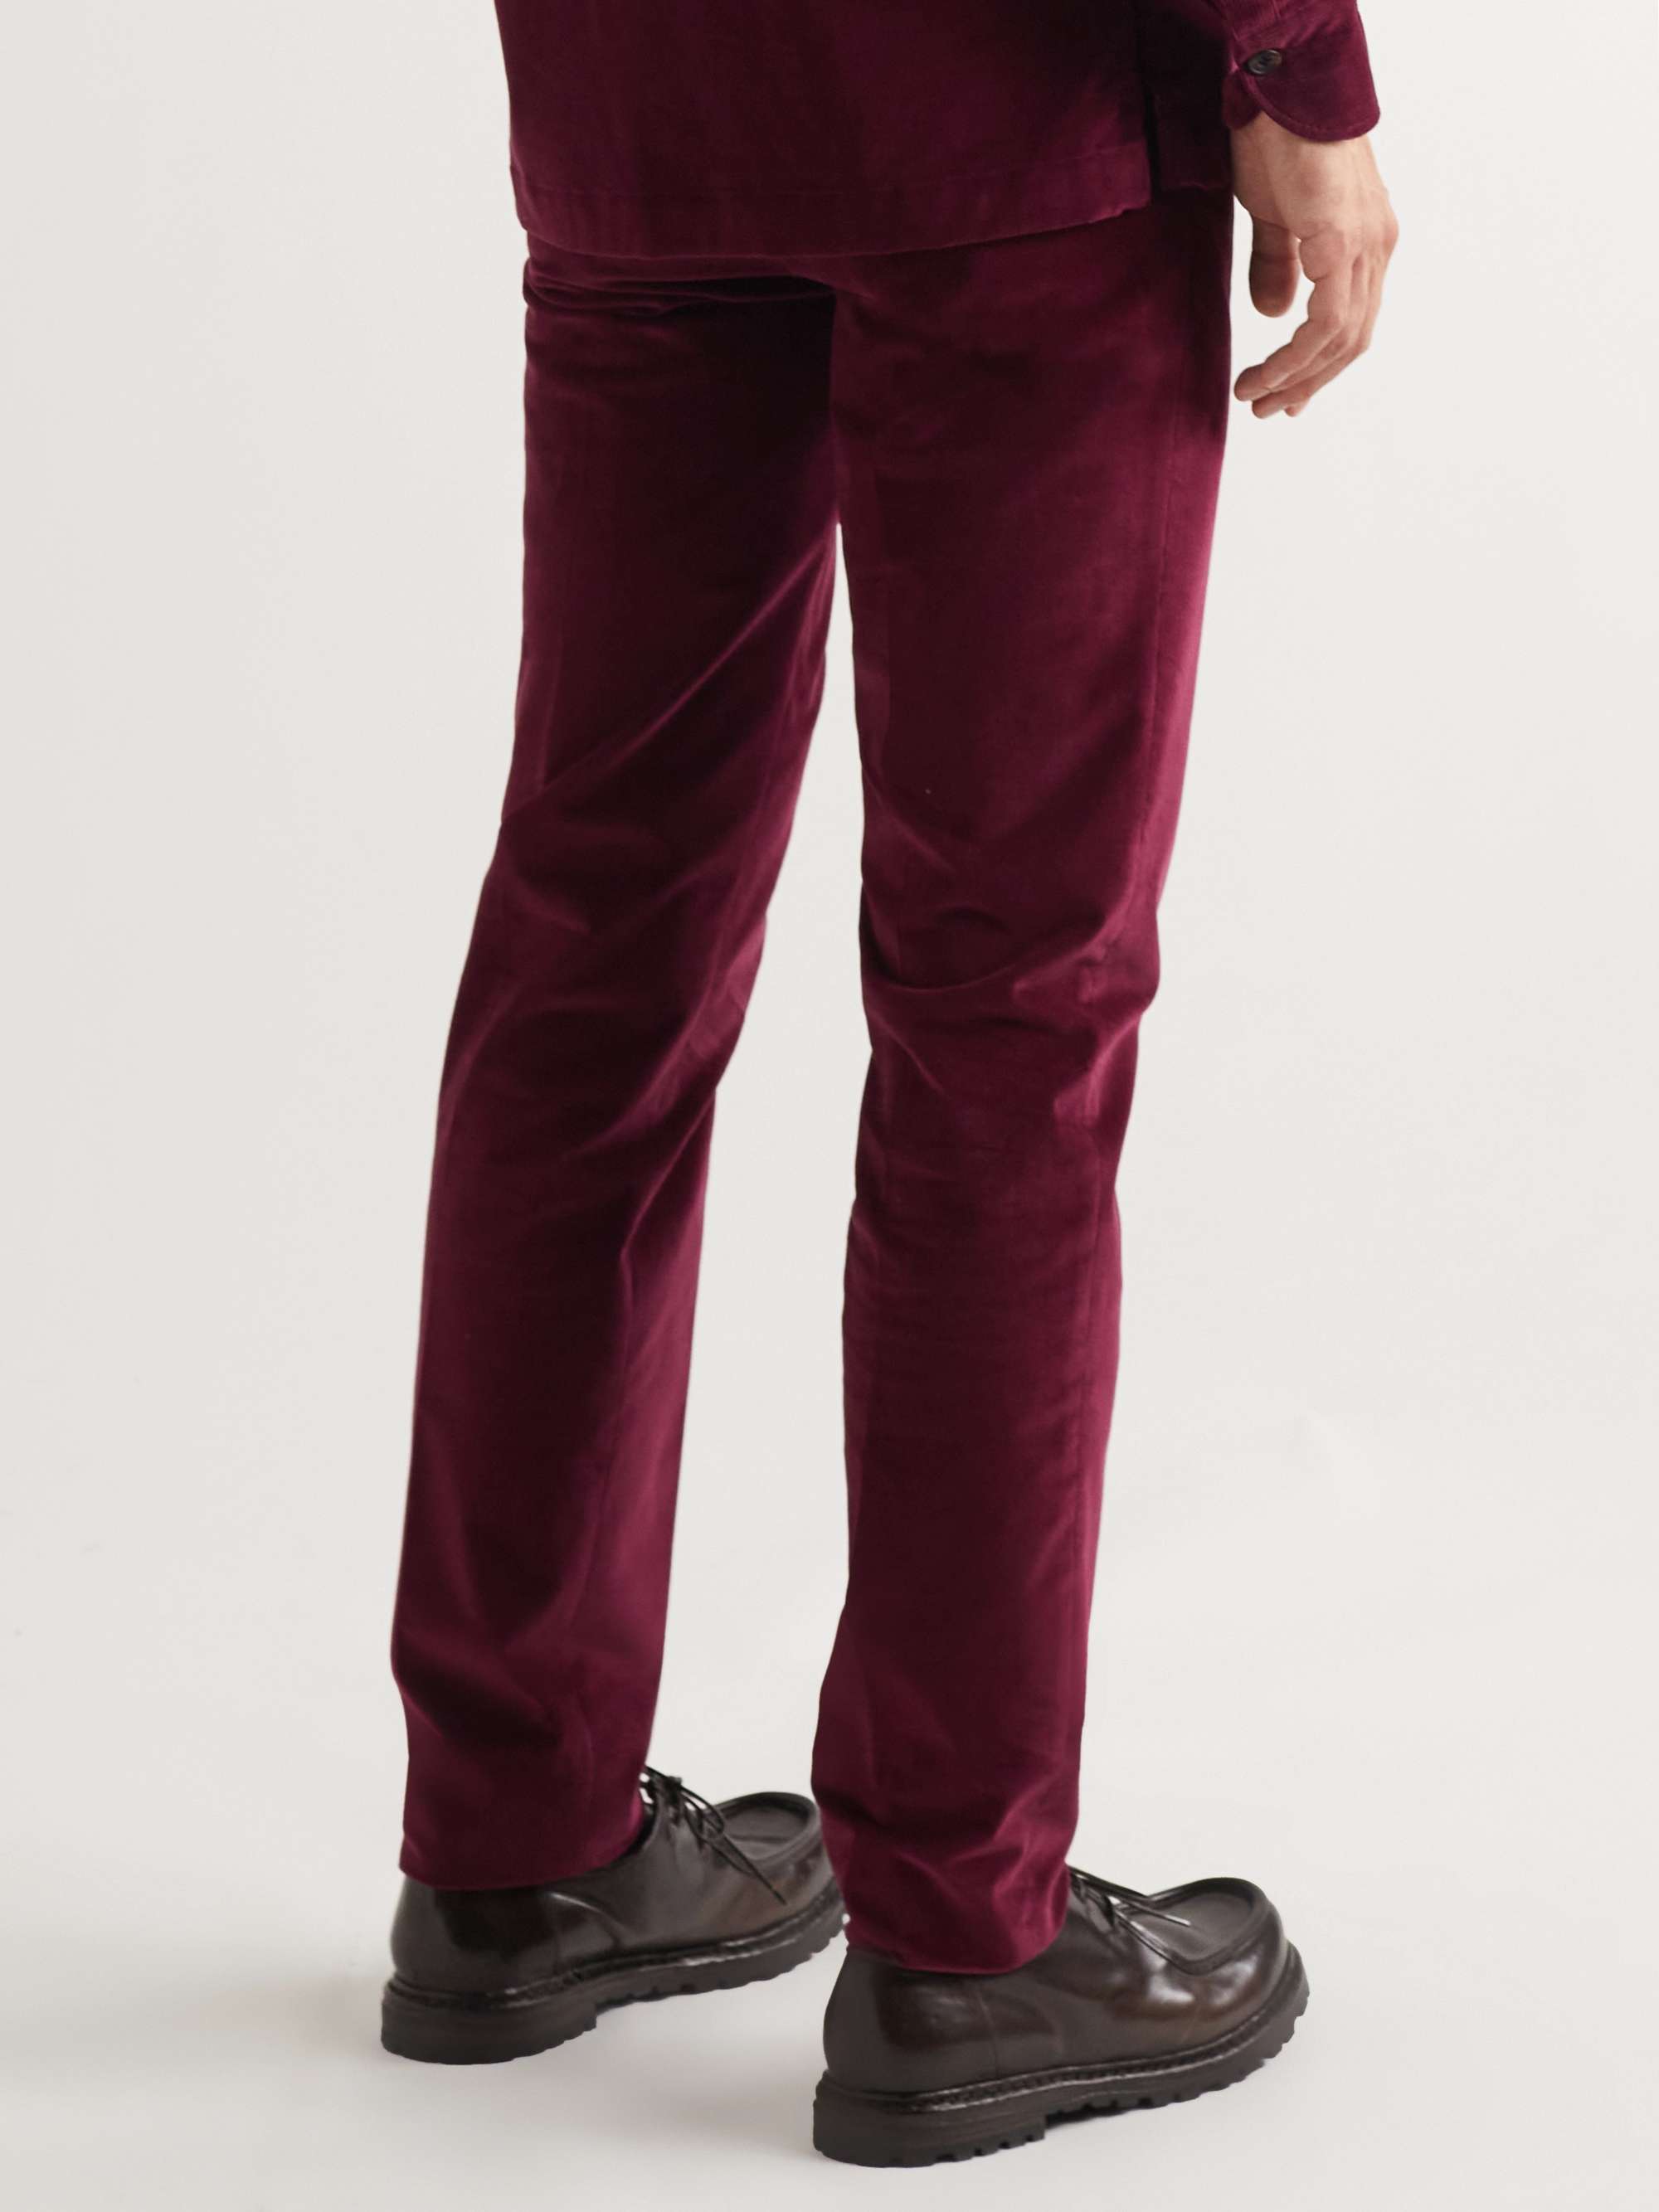 RUBINACCI Luca Slim-Fit Tapered Cotton-Blend Corduroy Trousers